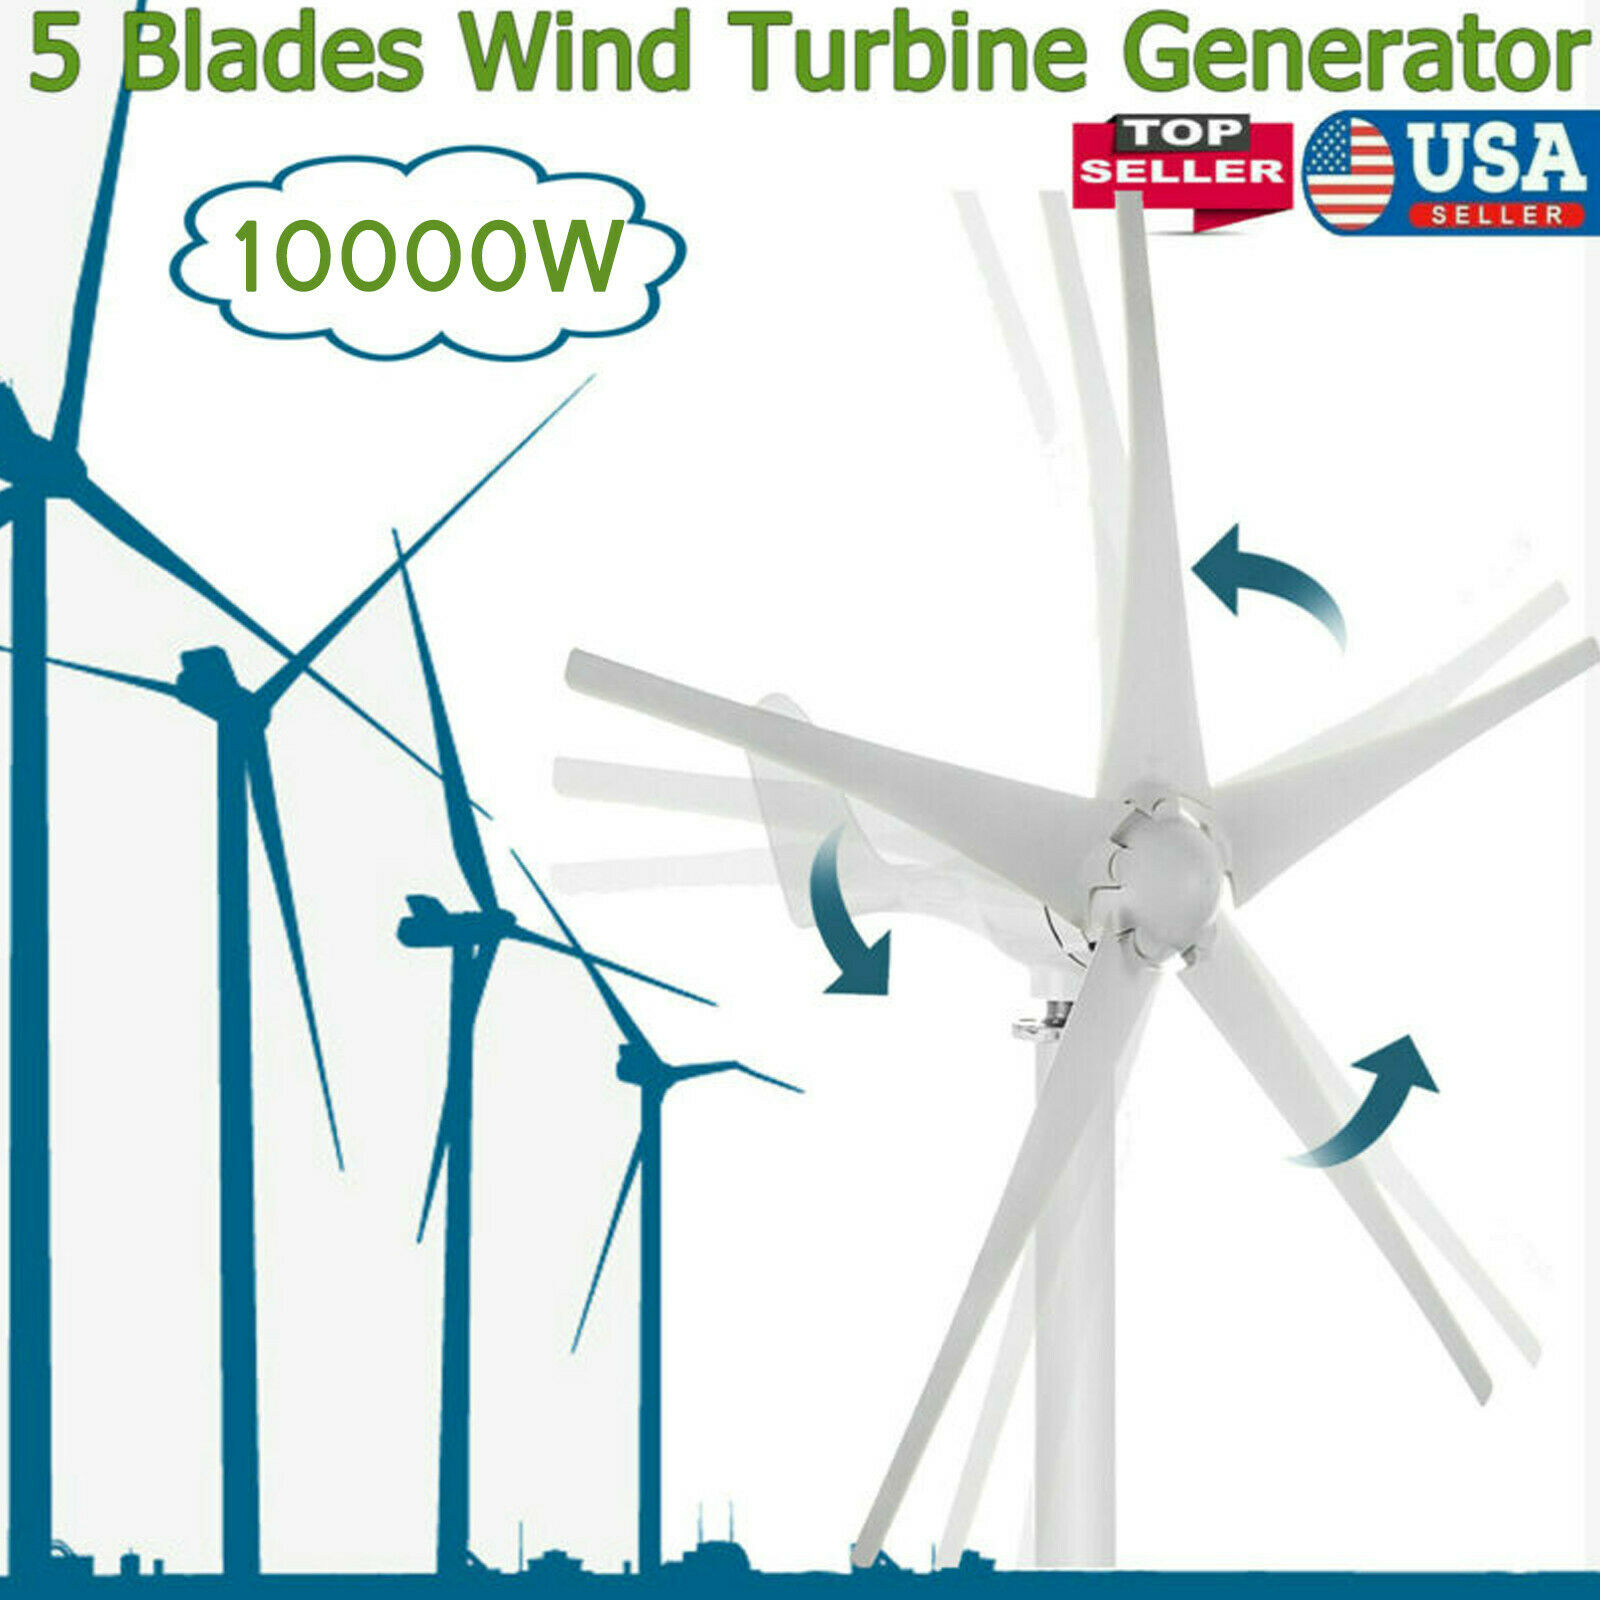 10000w Wind Turbine Generator Unit 5 Blades Dc 12v With Power Charge Controller/